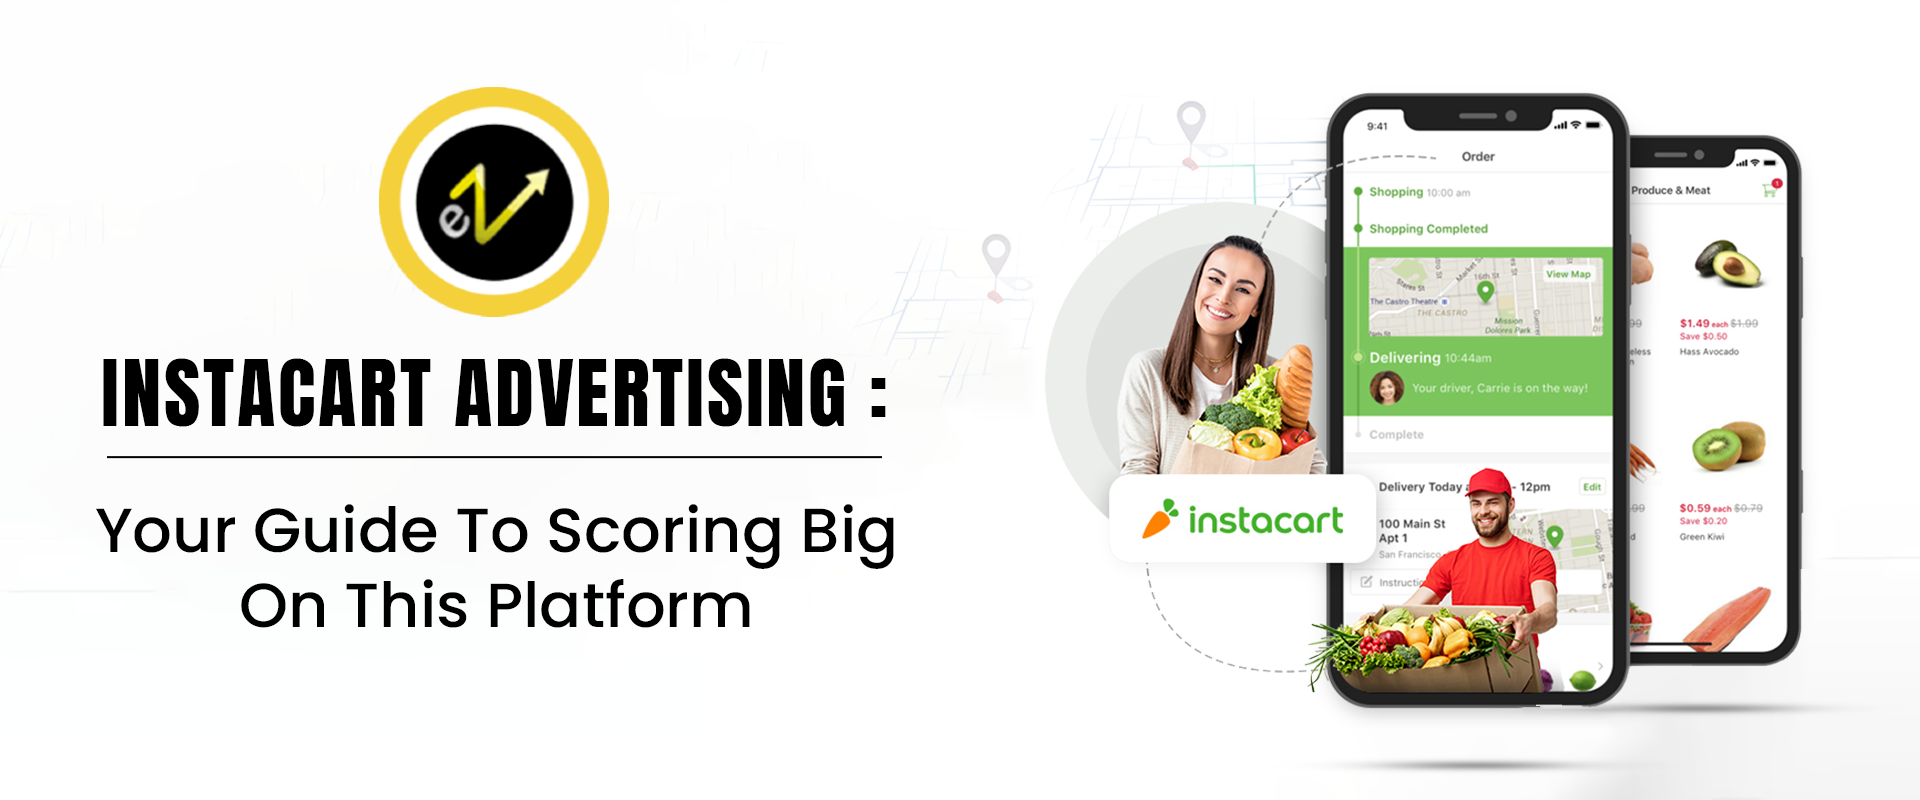 Instacart Advertising Services